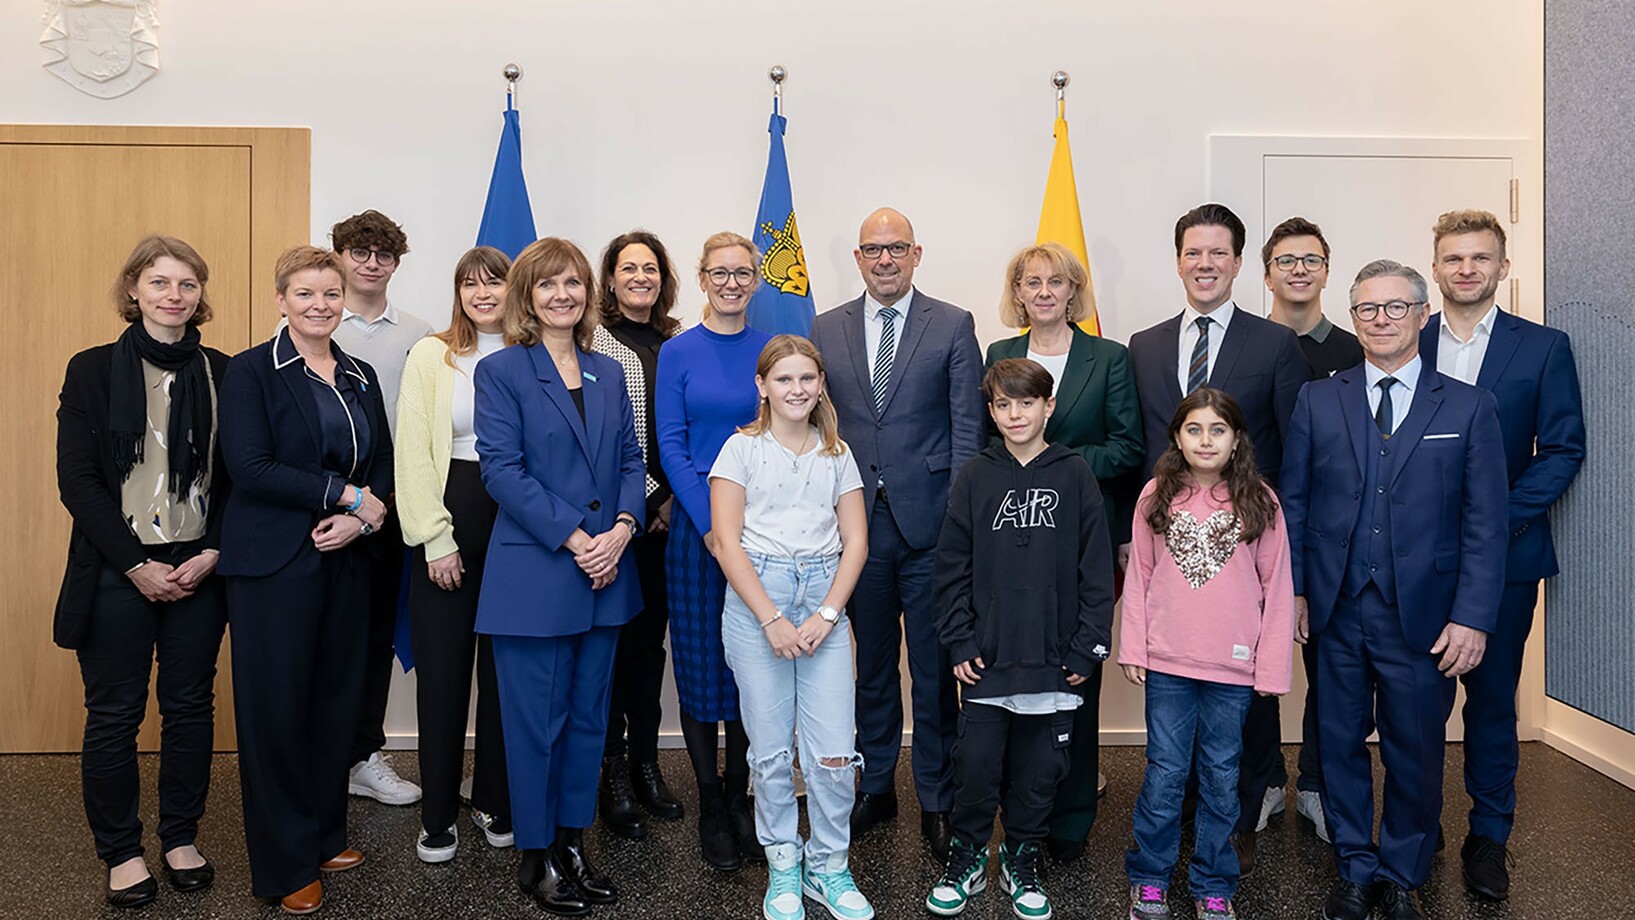 The members of the government with the young Liechtensteiners and the representatives of UNICEF Switzerland and Liechtenstein.